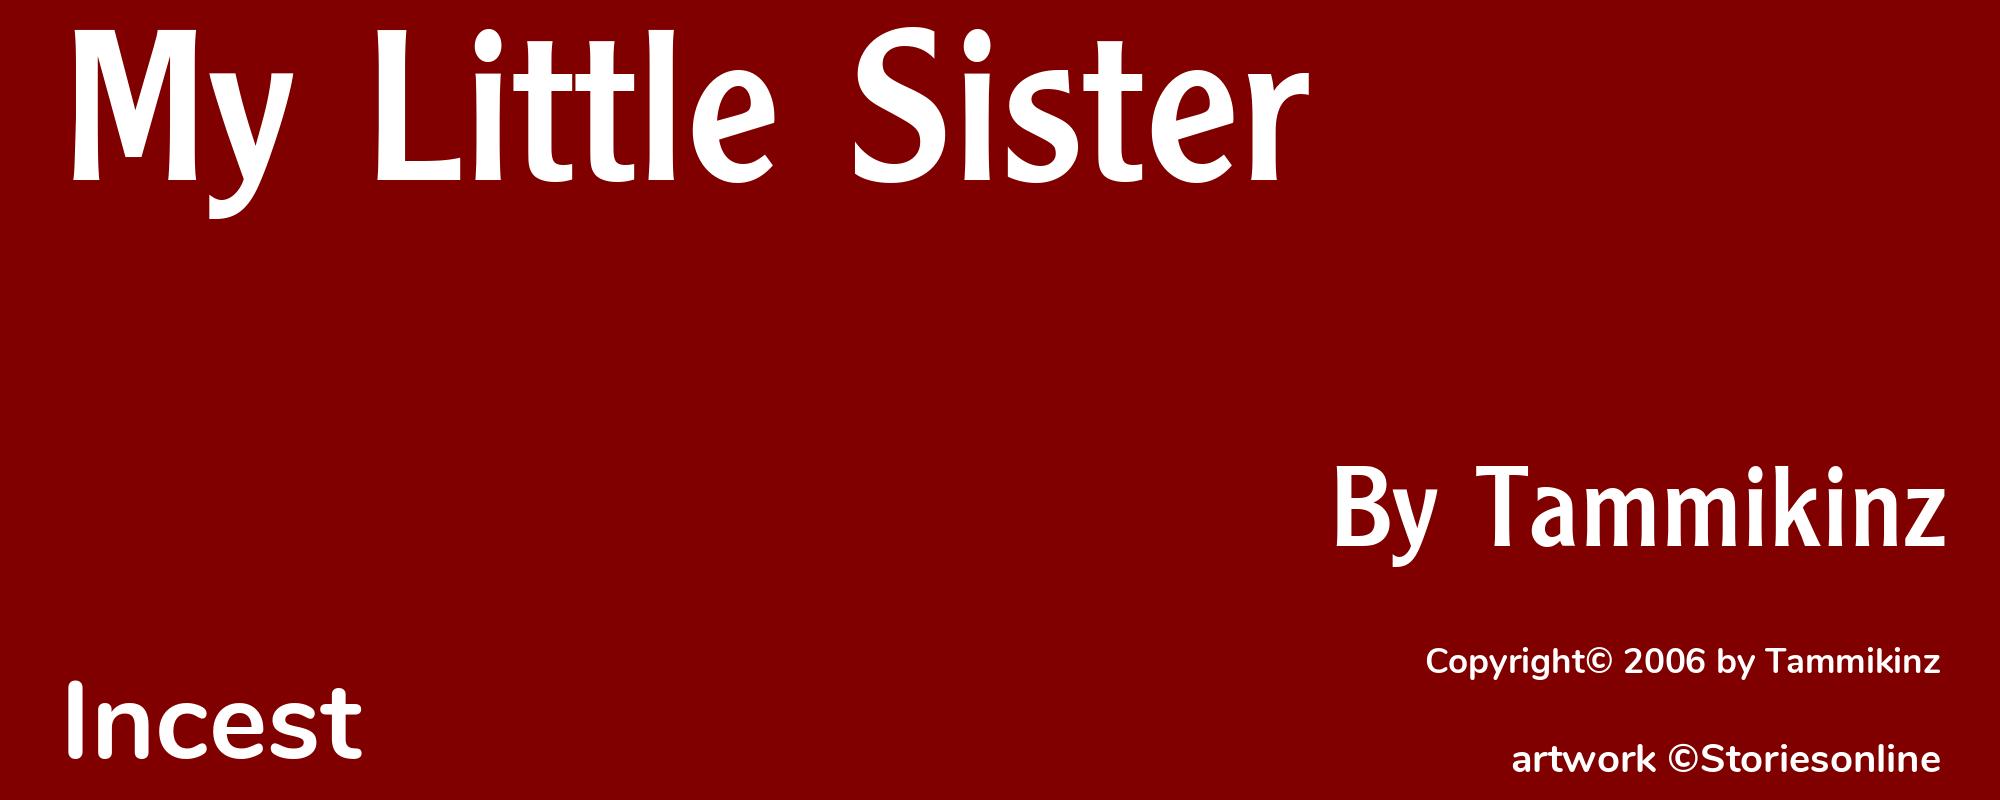 My Little Sister - Cover